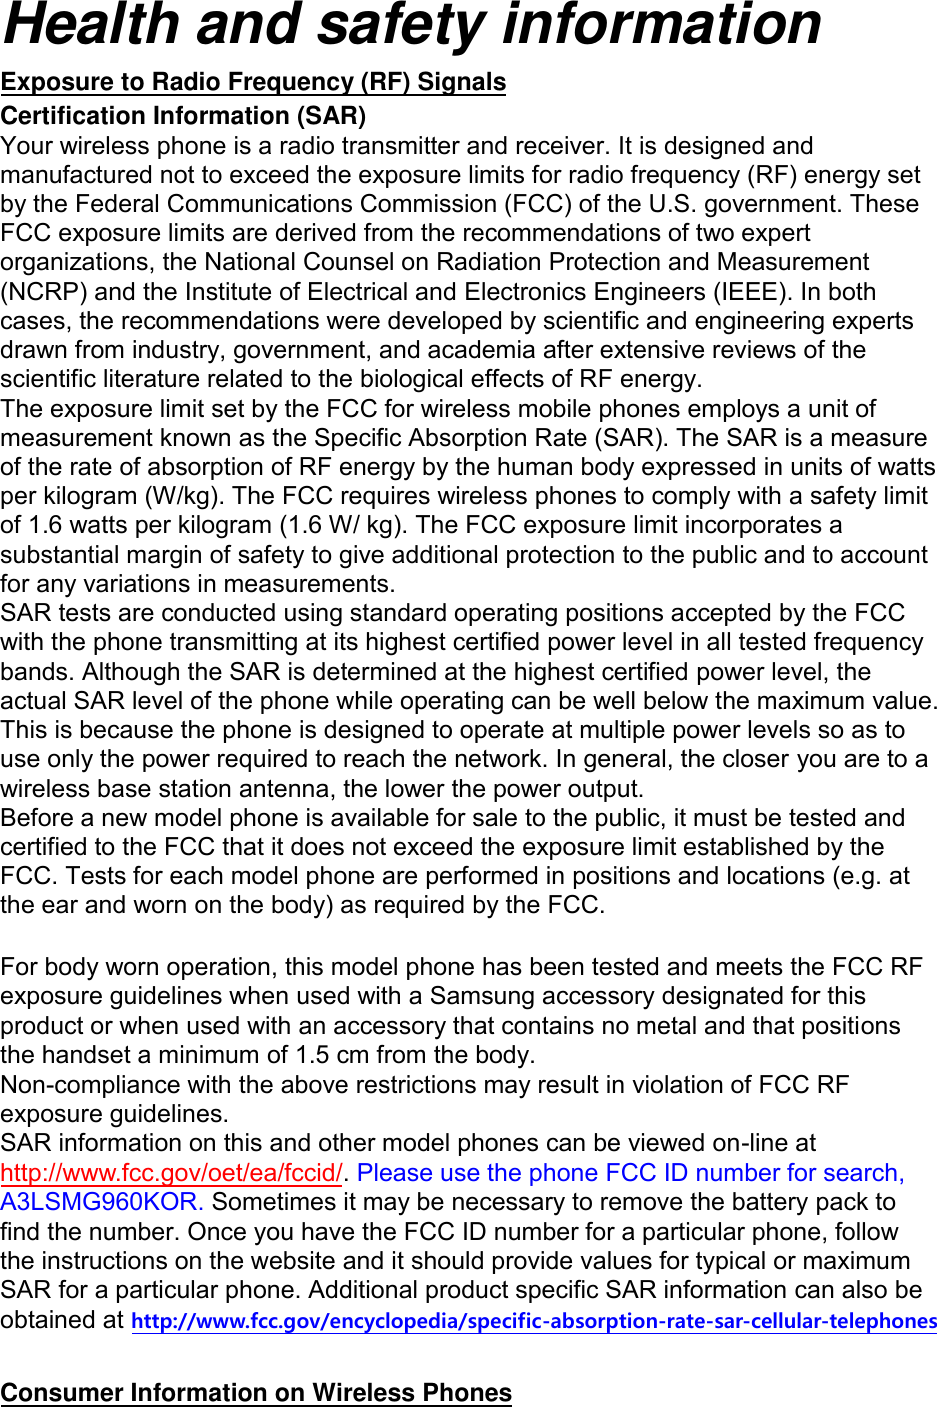 Health and safety information Exposure to Radio Frequency (RF) Signals Certification Information (SAR) Your wireless phone is a radio transmitter and receiver. It is designed and manufactured not to exceed the exposure limits for radio frequency (RF) energy set by the Federal Communications Commission (FCC) of the U.S. government. These FCC exposure limits are derived from the recommendations of two expert organizations, the National Counsel on Radiation Protection and Measurement (NCRP) and the Institute of Electrical and Electronics Engineers (IEEE). In both cases, the recommendations were developed by scientific and engineering experts drawn from industry, government, and academia after extensive reviews of the scientific literature related to the biological effects of RF energy. The exposure limit set by the FCC for wireless mobile phones employs a unit of measurement known as the Specific Absorption Rate (SAR). The SAR is a measure of the rate of absorption of RF energy by the human body expressed in units of watts per kilogram (W/kg). The FCC requires wireless phones to comply with a safety limit of 1.6 watts per kilogram (1.6 W/ kg). The FCC exposure limit incorporates a substantial margin of safety to give additional protection to the public and to account for any variations in measurements. SAR tests are conducted using standard operating positions accepted by the FCC with the phone transmitting at its highest certified power level in all tested frequency bands. Although the SAR is determined at the highest certified power level, the actual SAR level of the phone while operating can be well below the maximum value. This is because the phone is designed to operate at multiple power levels so as to use only the power required to reach the network. In general, the closer you are to a wireless base station antenna, the lower the power output. Before a new model phone is available for sale to the public, it must be tested and certified to the FCC that it does not exceed the exposure limit established by the FCC. Tests for each model phone are performed in positions and locations (e.g. at the ear and worn on the body) as required by the FCC.    For body worn operation, this model phone has been tested and meets the FCC RF exposure guidelines when used with a Samsung accessory designated for this product or when used with an accessory that contains no metal and that positions the handset a minimum of 1.5 cm from the body.   Non-compliance with the above restrictions may result in violation of FCC RF exposure guidelines. SAR information on this and other model phones can be viewed on-line at http://www.fcc.gov/oet/ea/fccid/. Please use the phone FCC ID number for search, A3LSMG960KOR. Sometimes it may be necessary to remove the battery pack tofind the number. Once you have the FCC ID number for a particular phone, follow the instructions on the website and it should provide values for typical or maximum SAR for a particular phone. Additional product specific SAR information can also be obtained at http://www.fcc.gov/encyclopedia/specific-absorption-rate-sar-cellular-telephones Consumer Information on Wireless Phones 